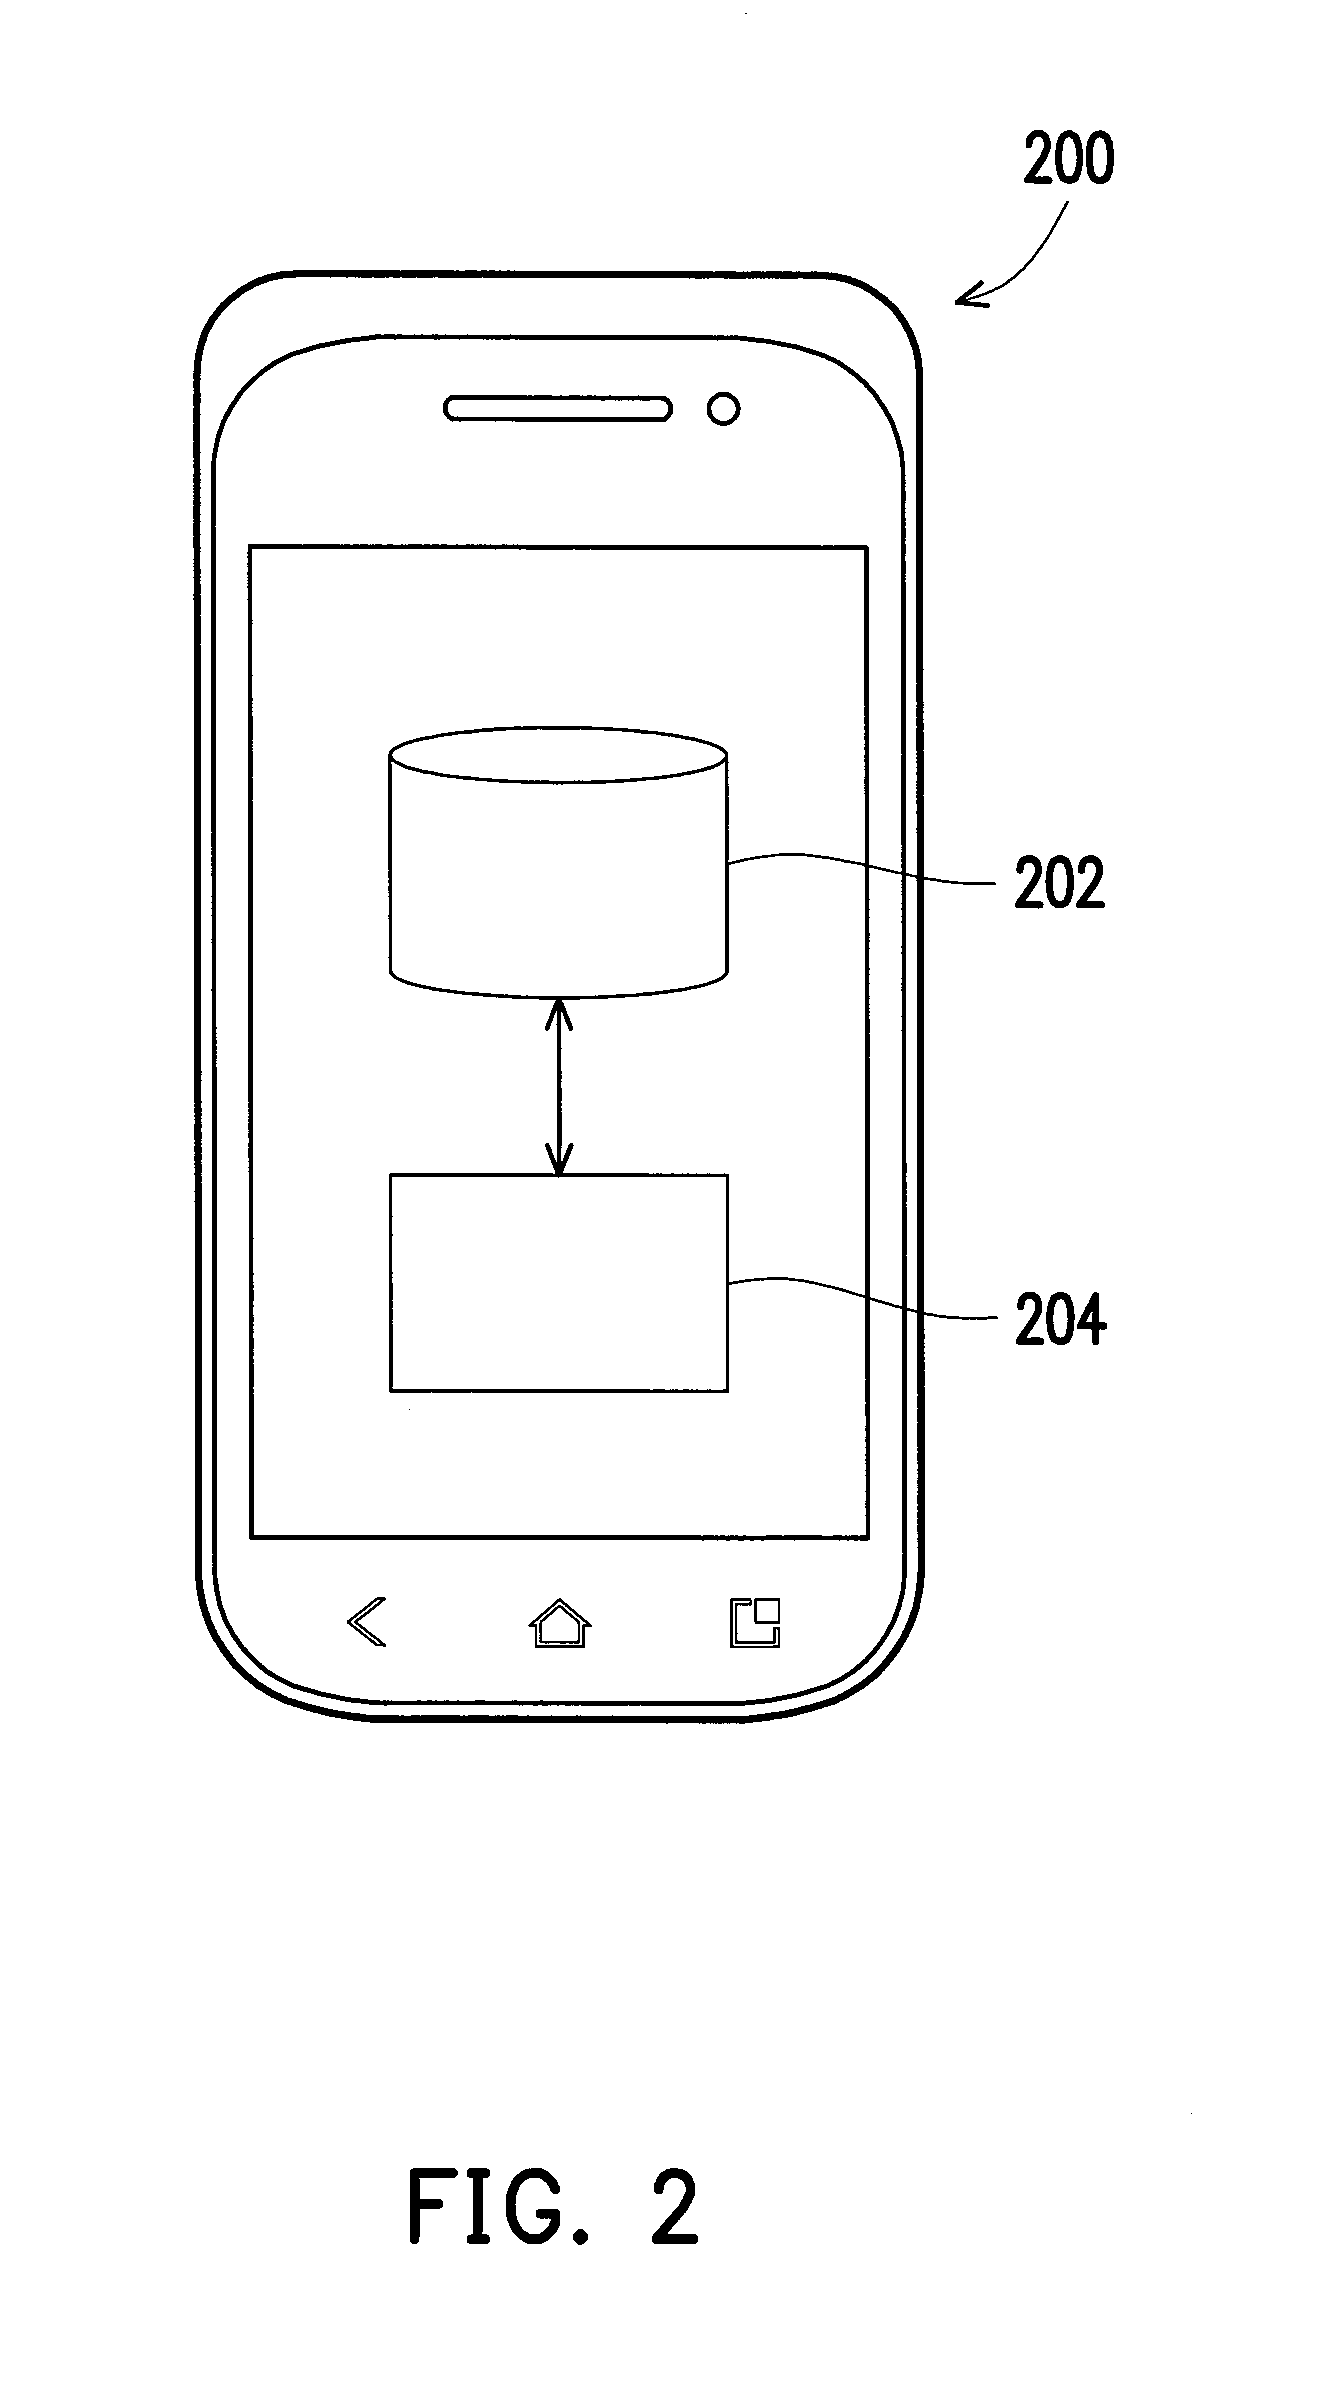 Application installation method and mobile device